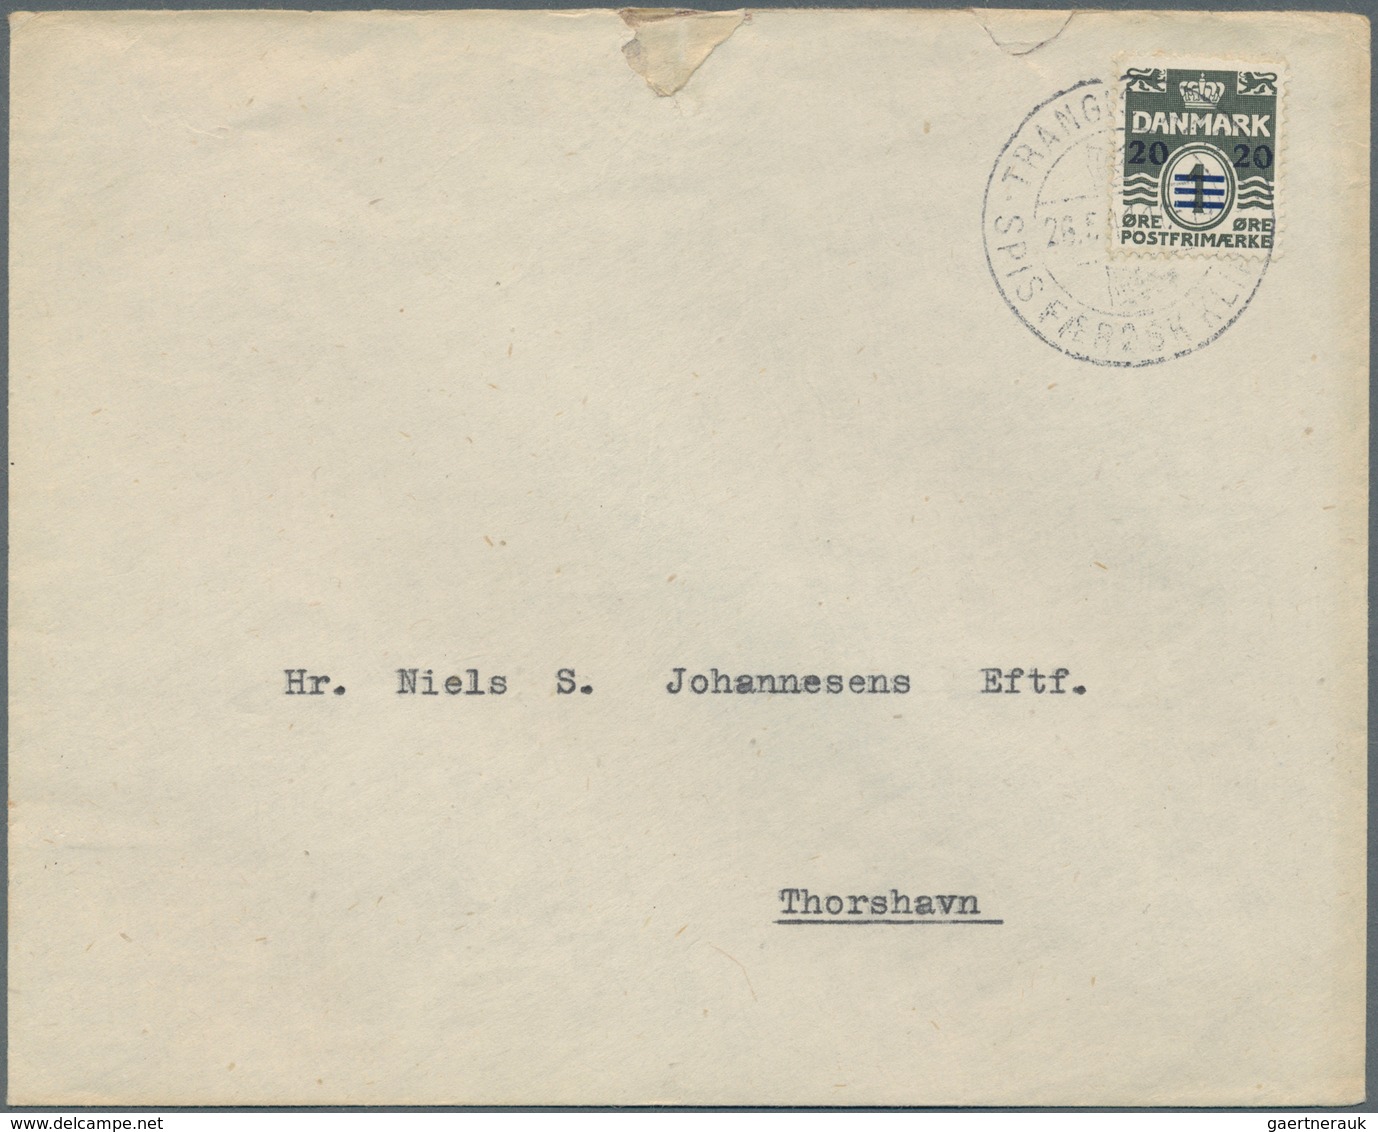 Dänemark - Färöer: 1941, 20 On 1 Öre Numeral On Domestic Letter To Thorshavn. Cover Showing Some Ope - Féroé (Iles)